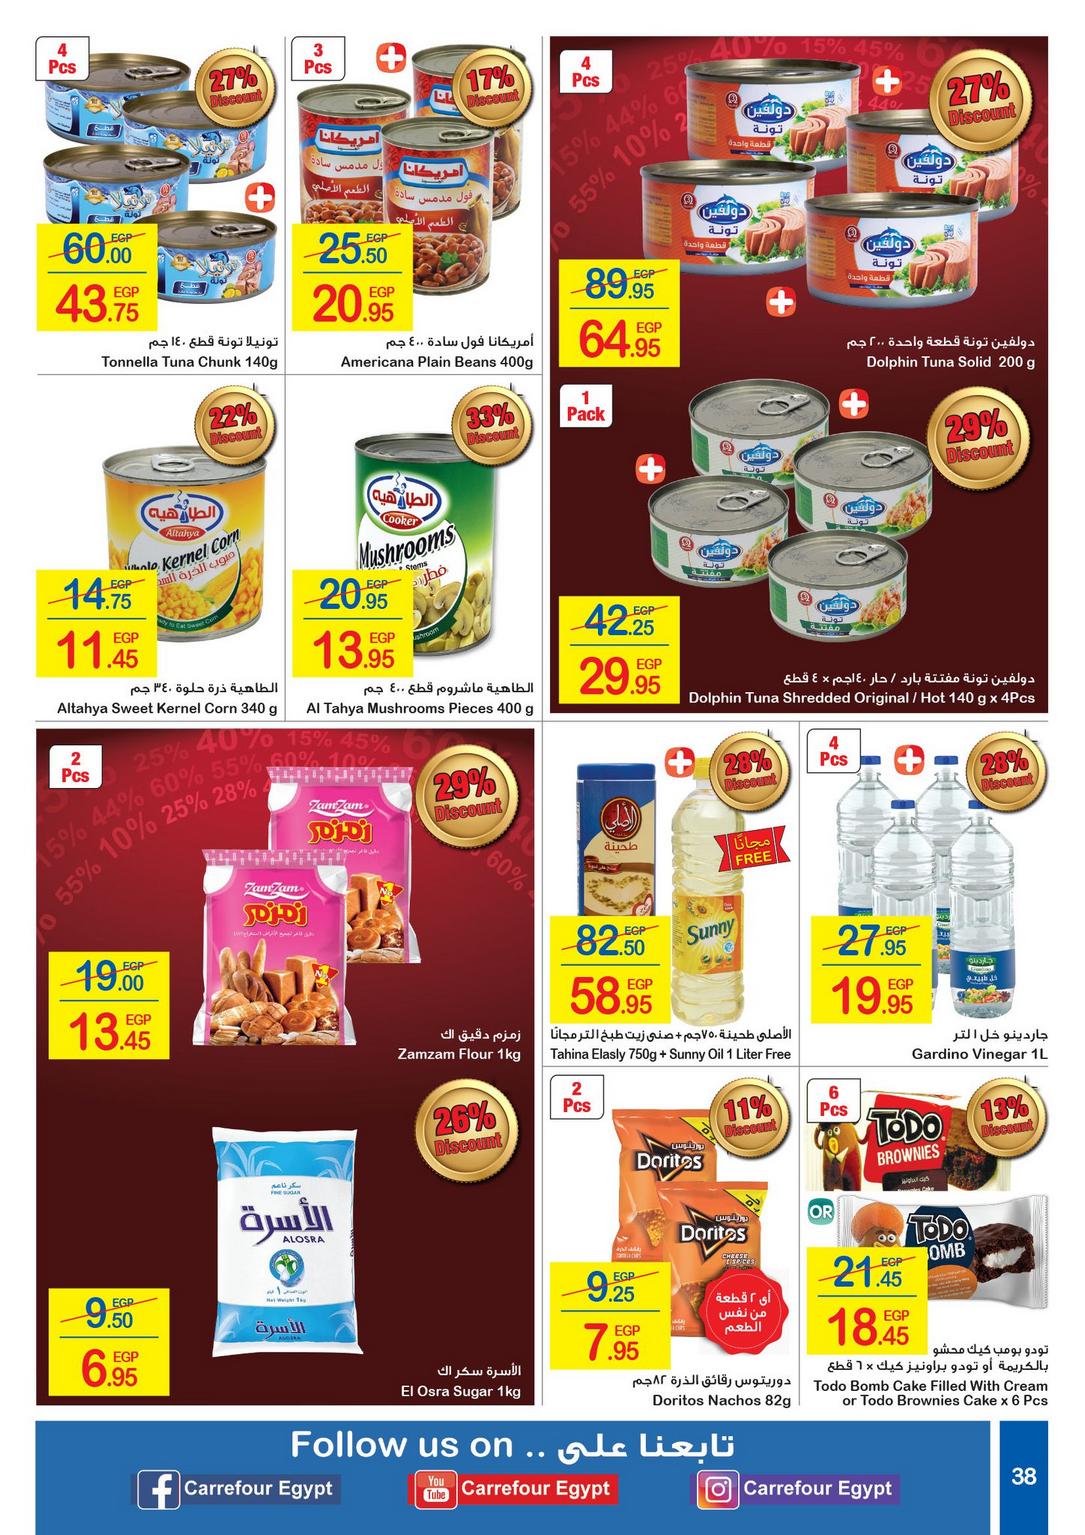 Carrefour Deals from 1/1 till 14/1 | Carrefour Egypt 39